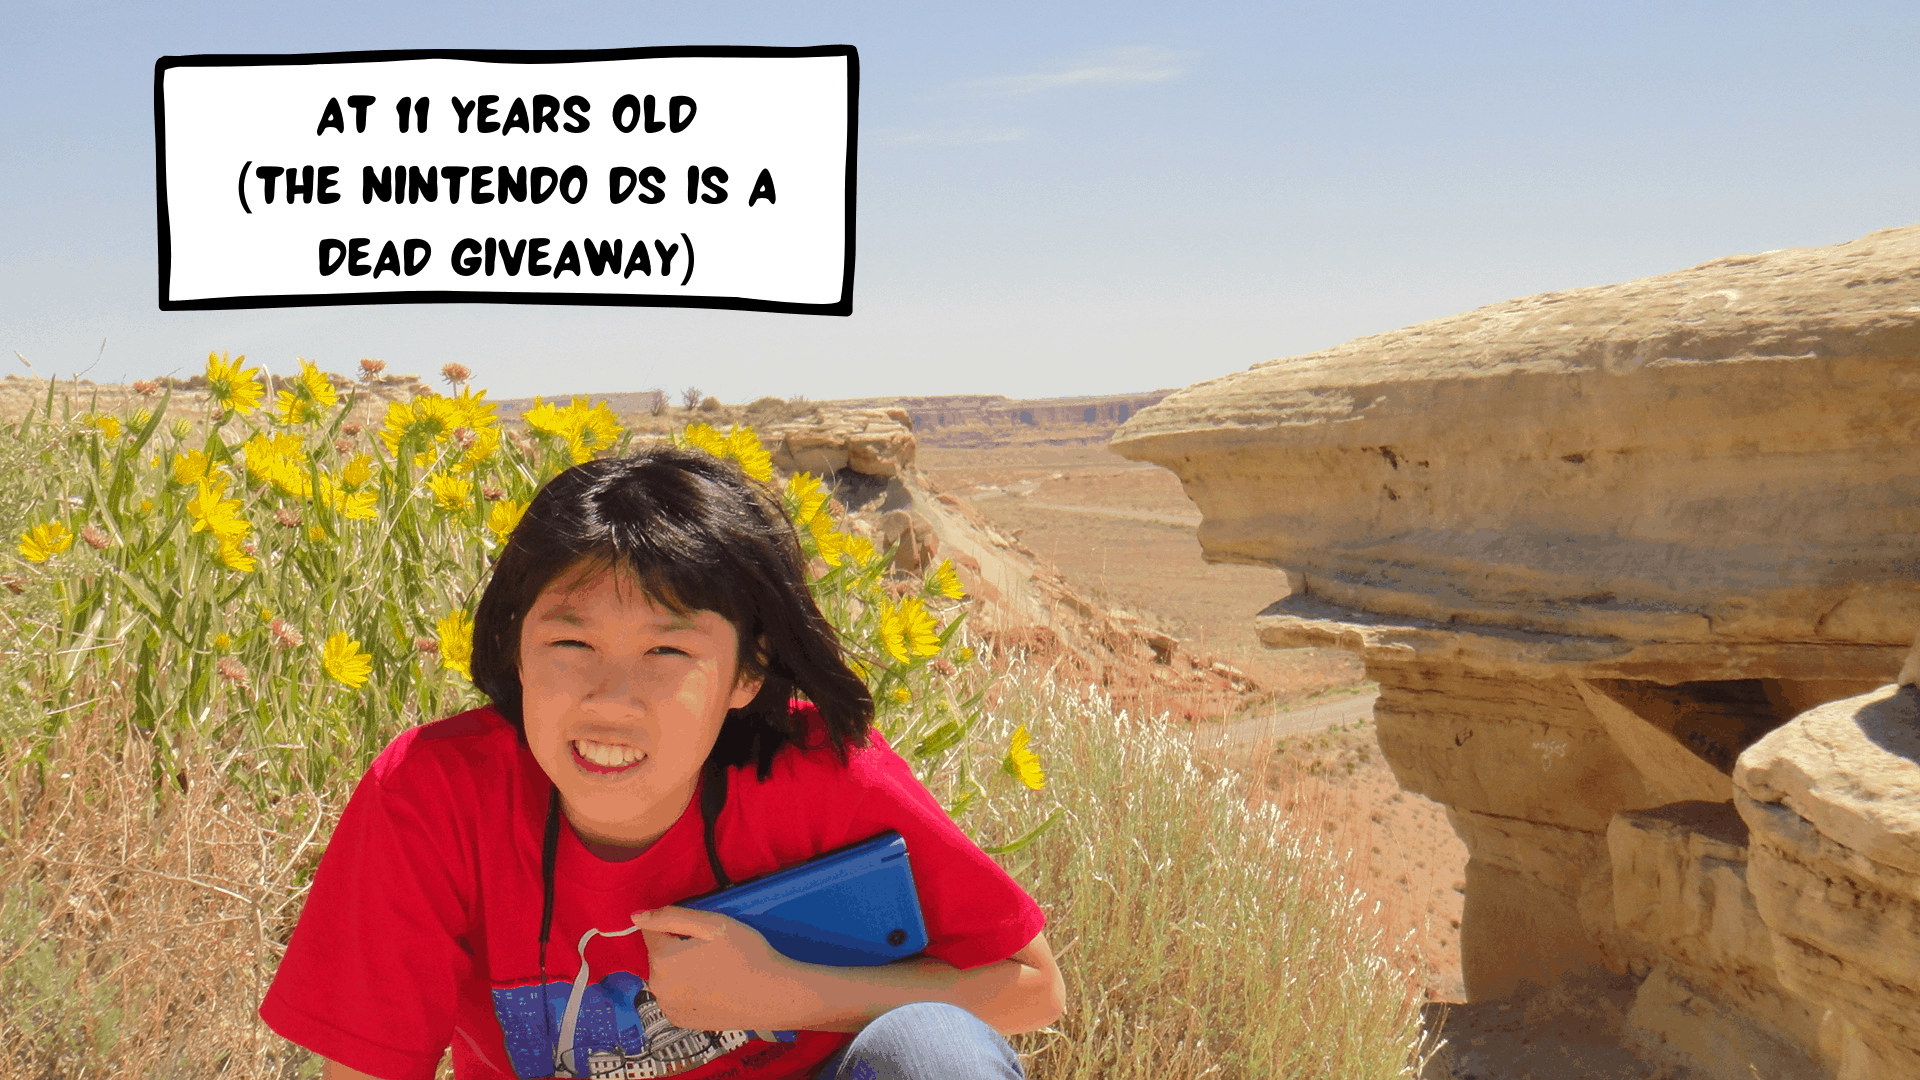 Meggie as an 11 year old with a red t-shirt with the St Louis Missouri Gateway Arch is sitting in front of a desert in Colorado or Utah, United States. The desert scene is brown and rocky. She is holding a Nintendo DSi XL. Yellow wildflowers are growing behind her.